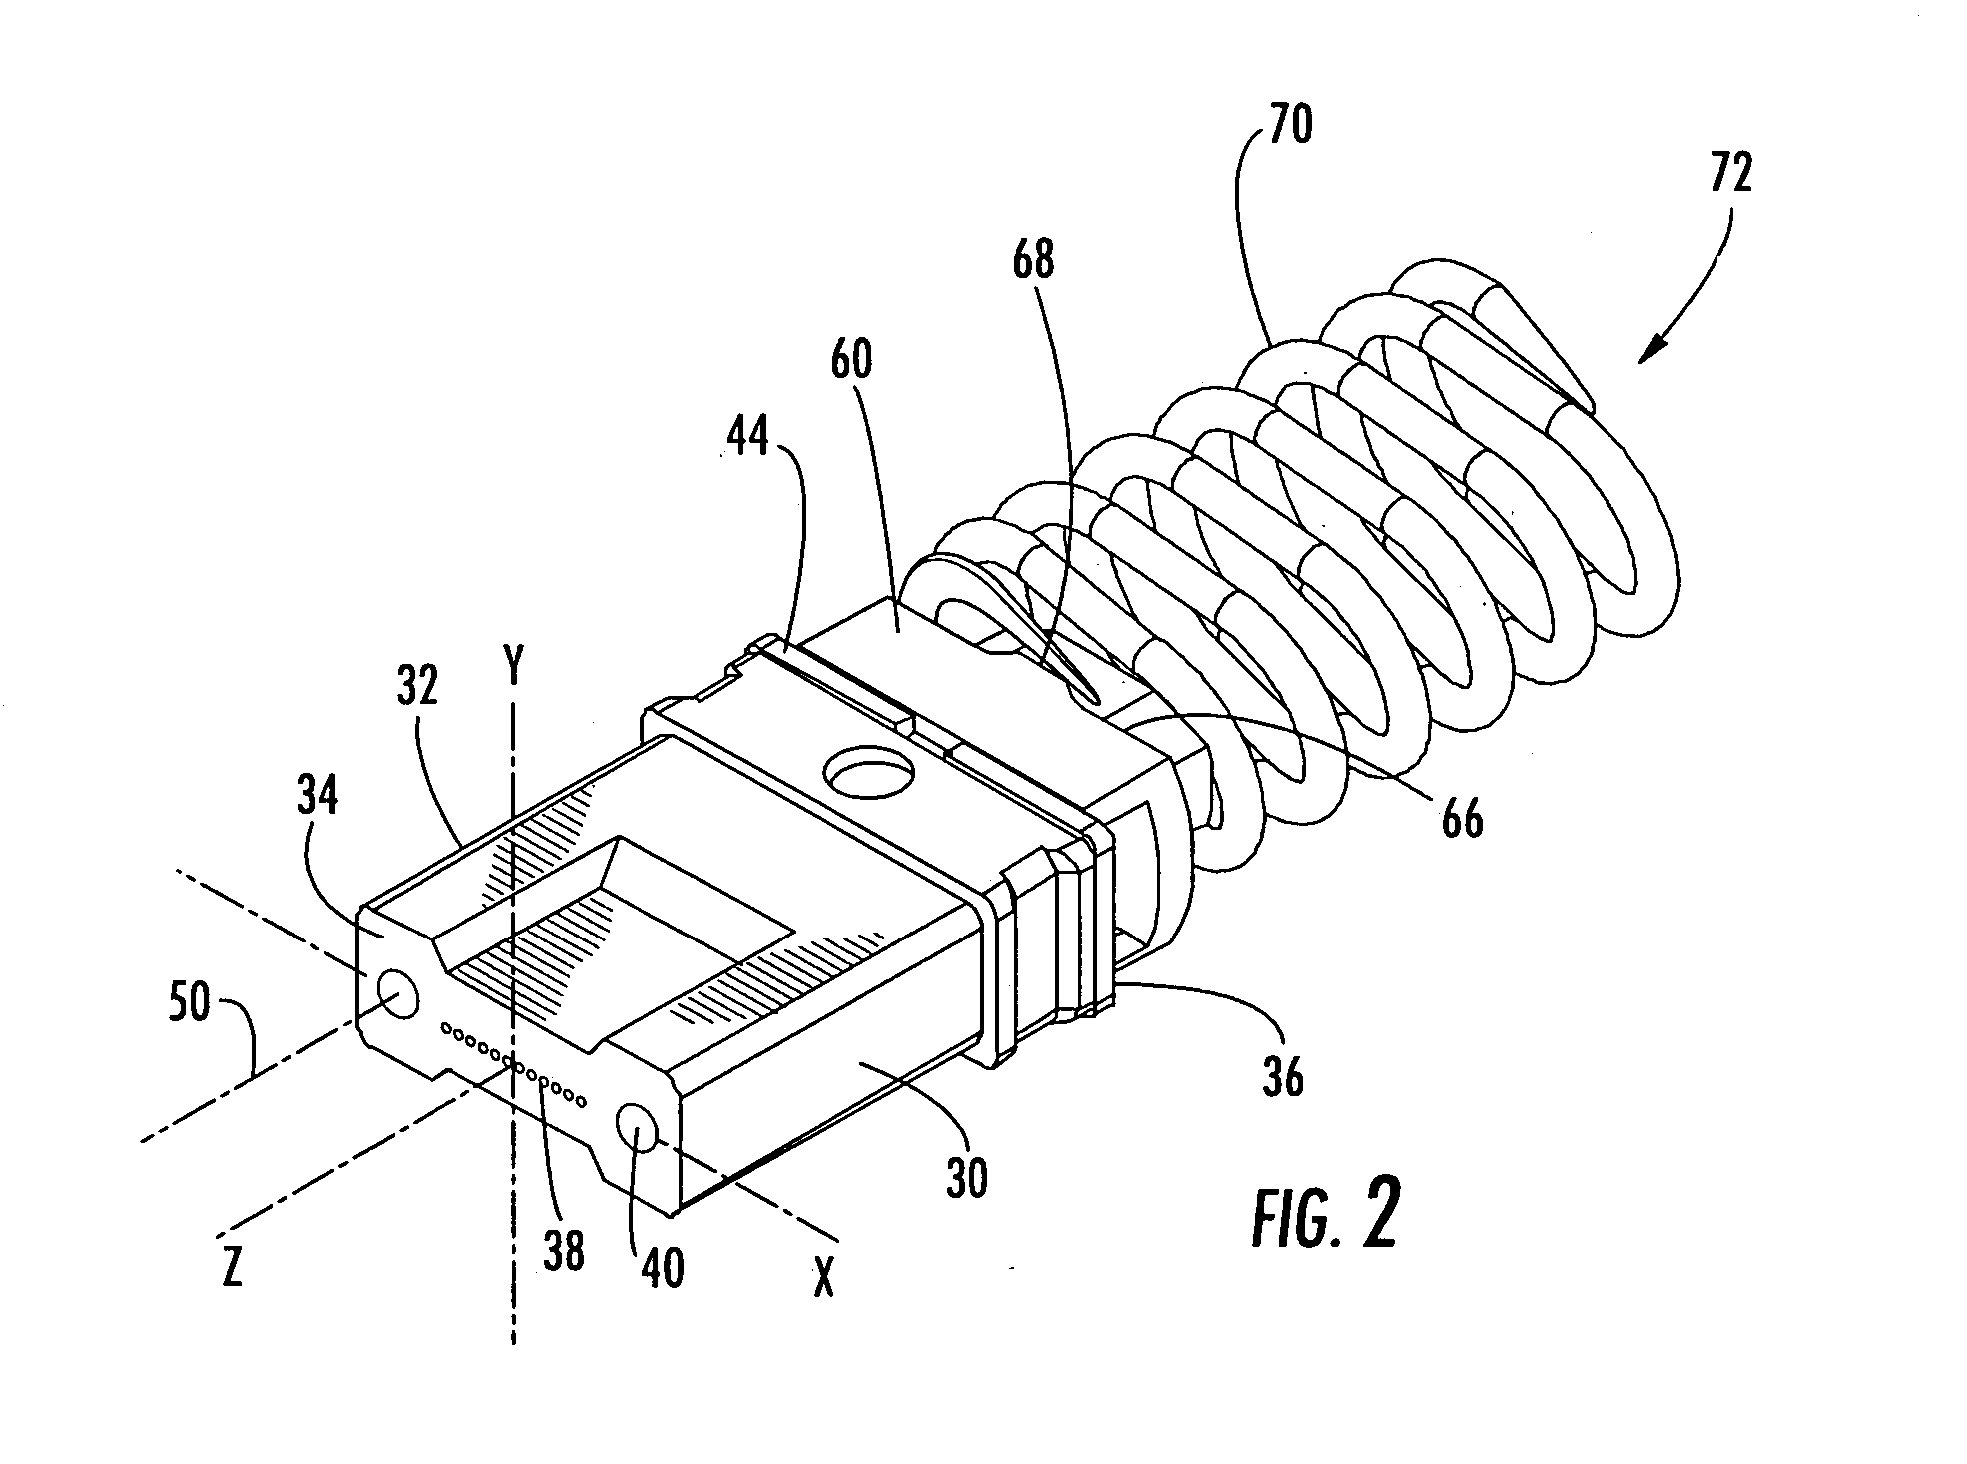 Fiber optic connection for applying axial biasing force to multifiber ferrule